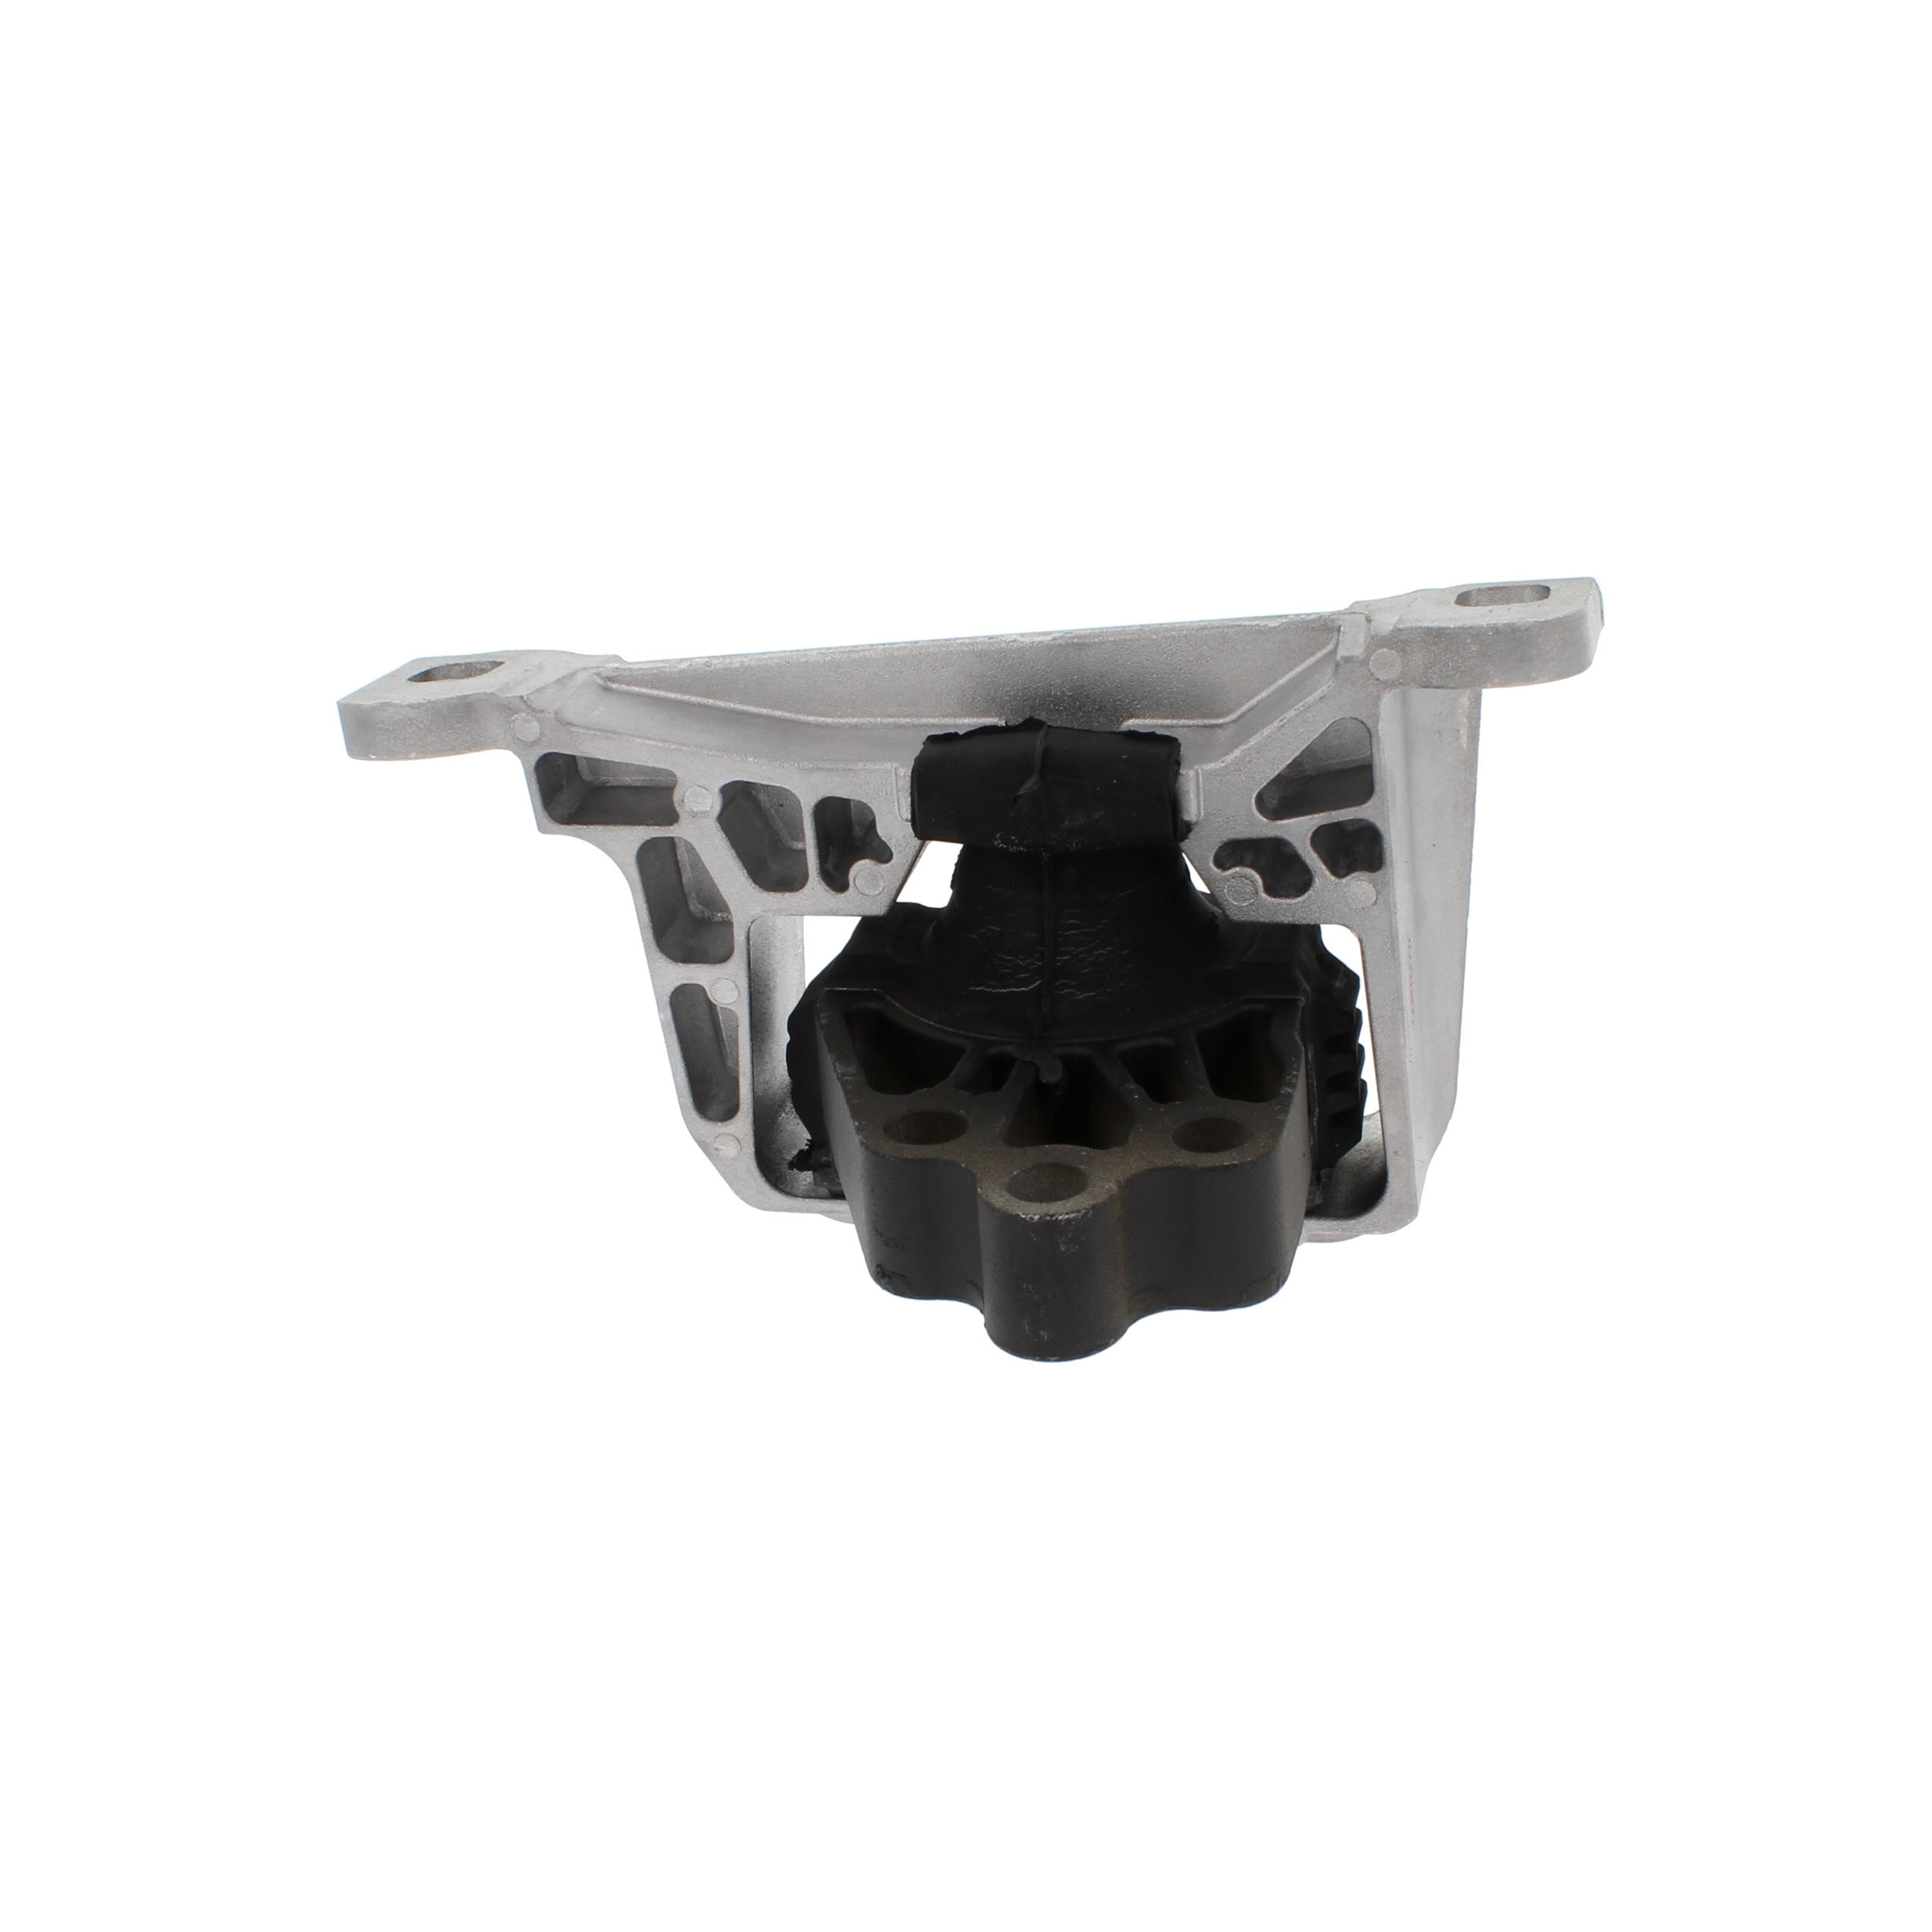 Ford KUGA Engine support mount 8310668 CORTECO 49361589 online buy